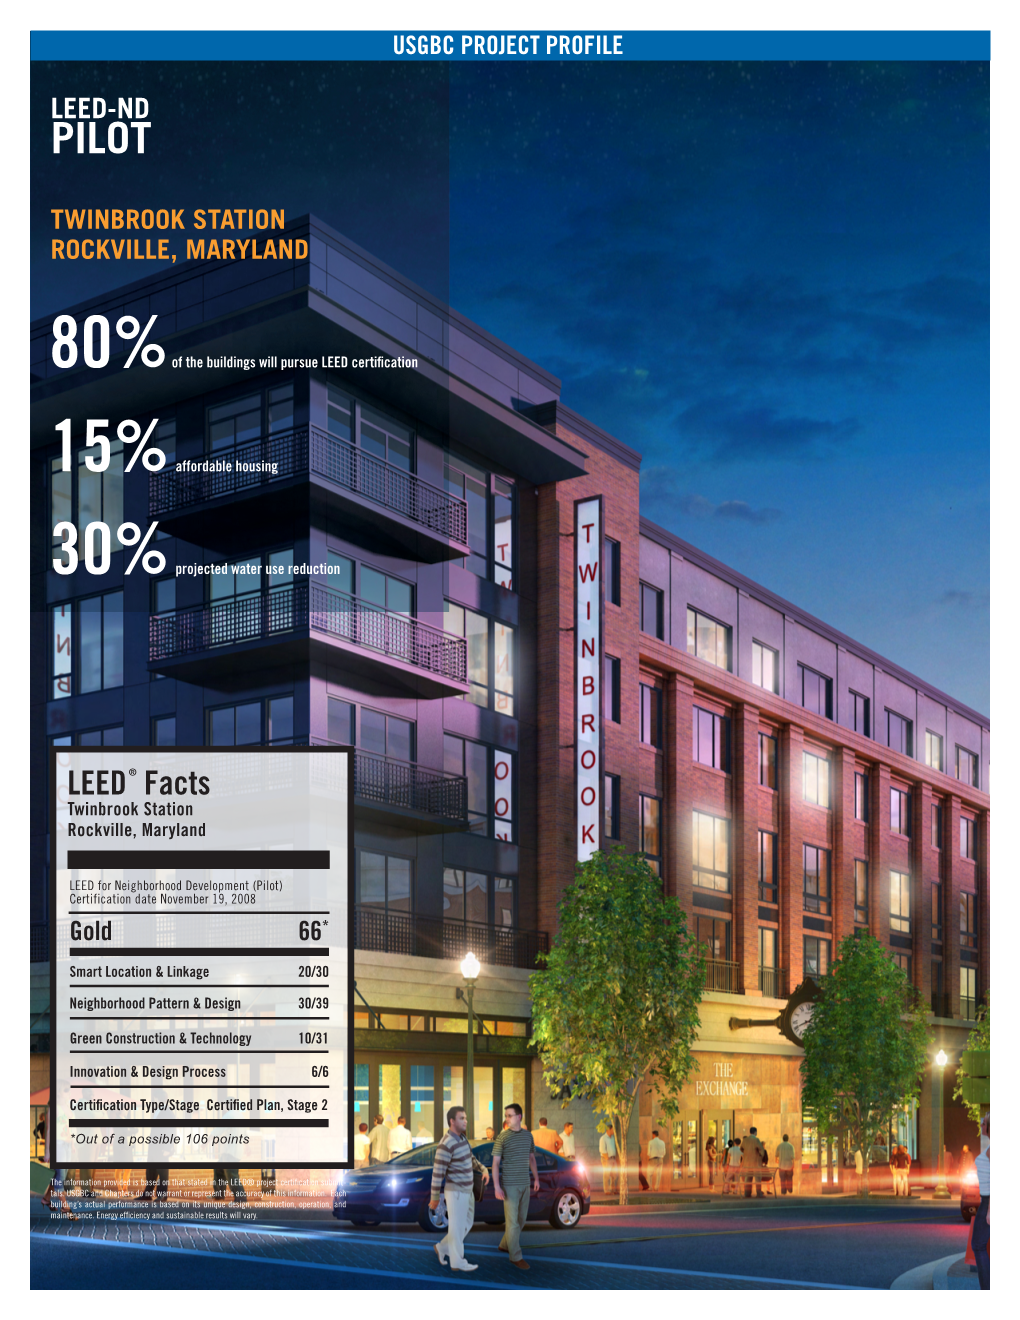 LEED ® Facts Twinbrook Station Rockville, Maryland